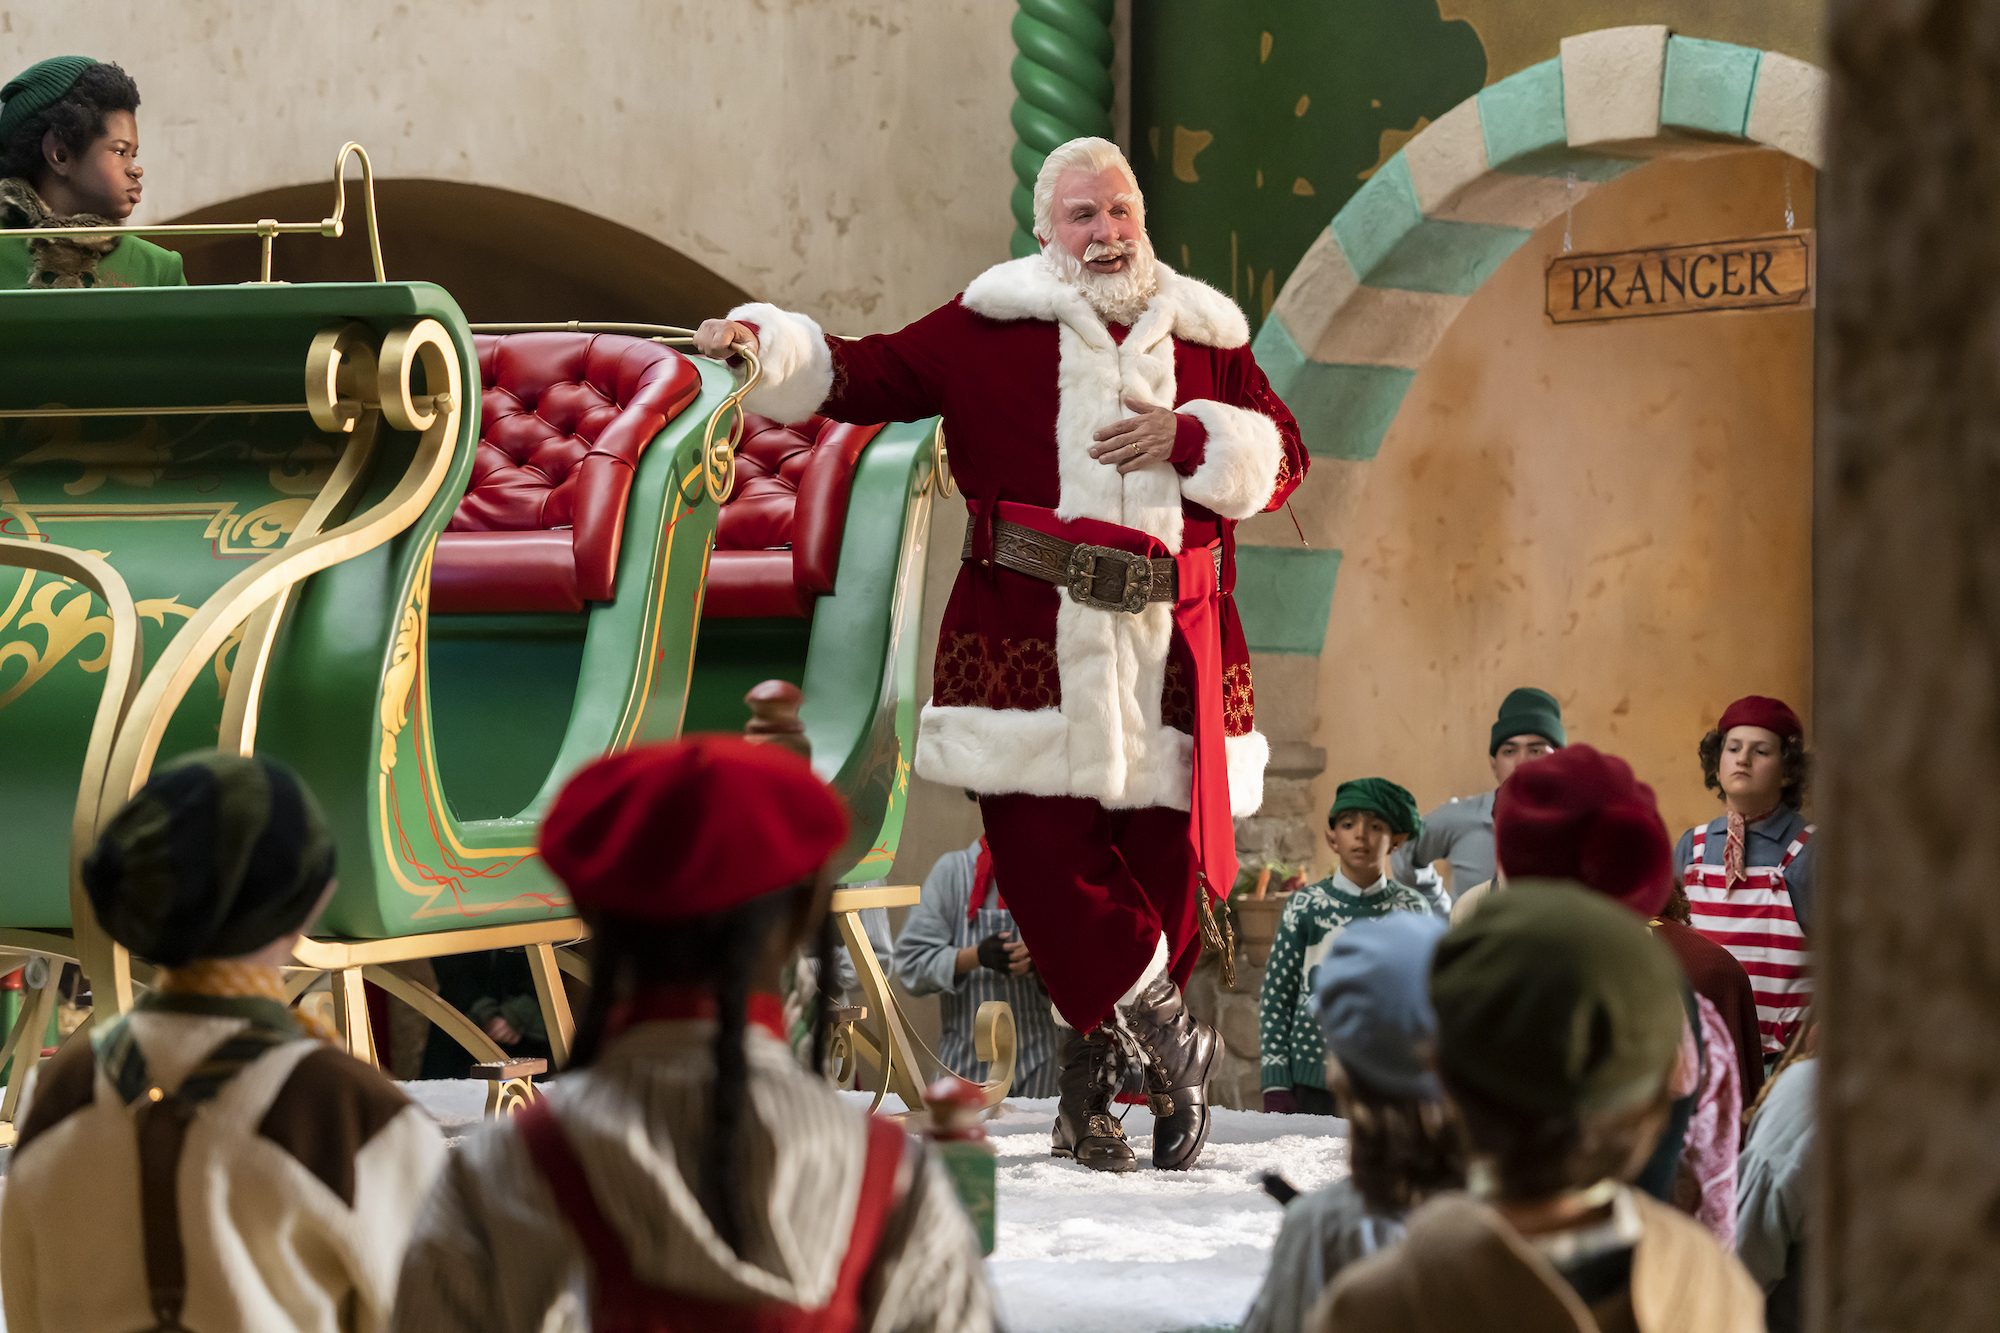 TV Show The Santa Clauses HD Wallpaper | Background Image